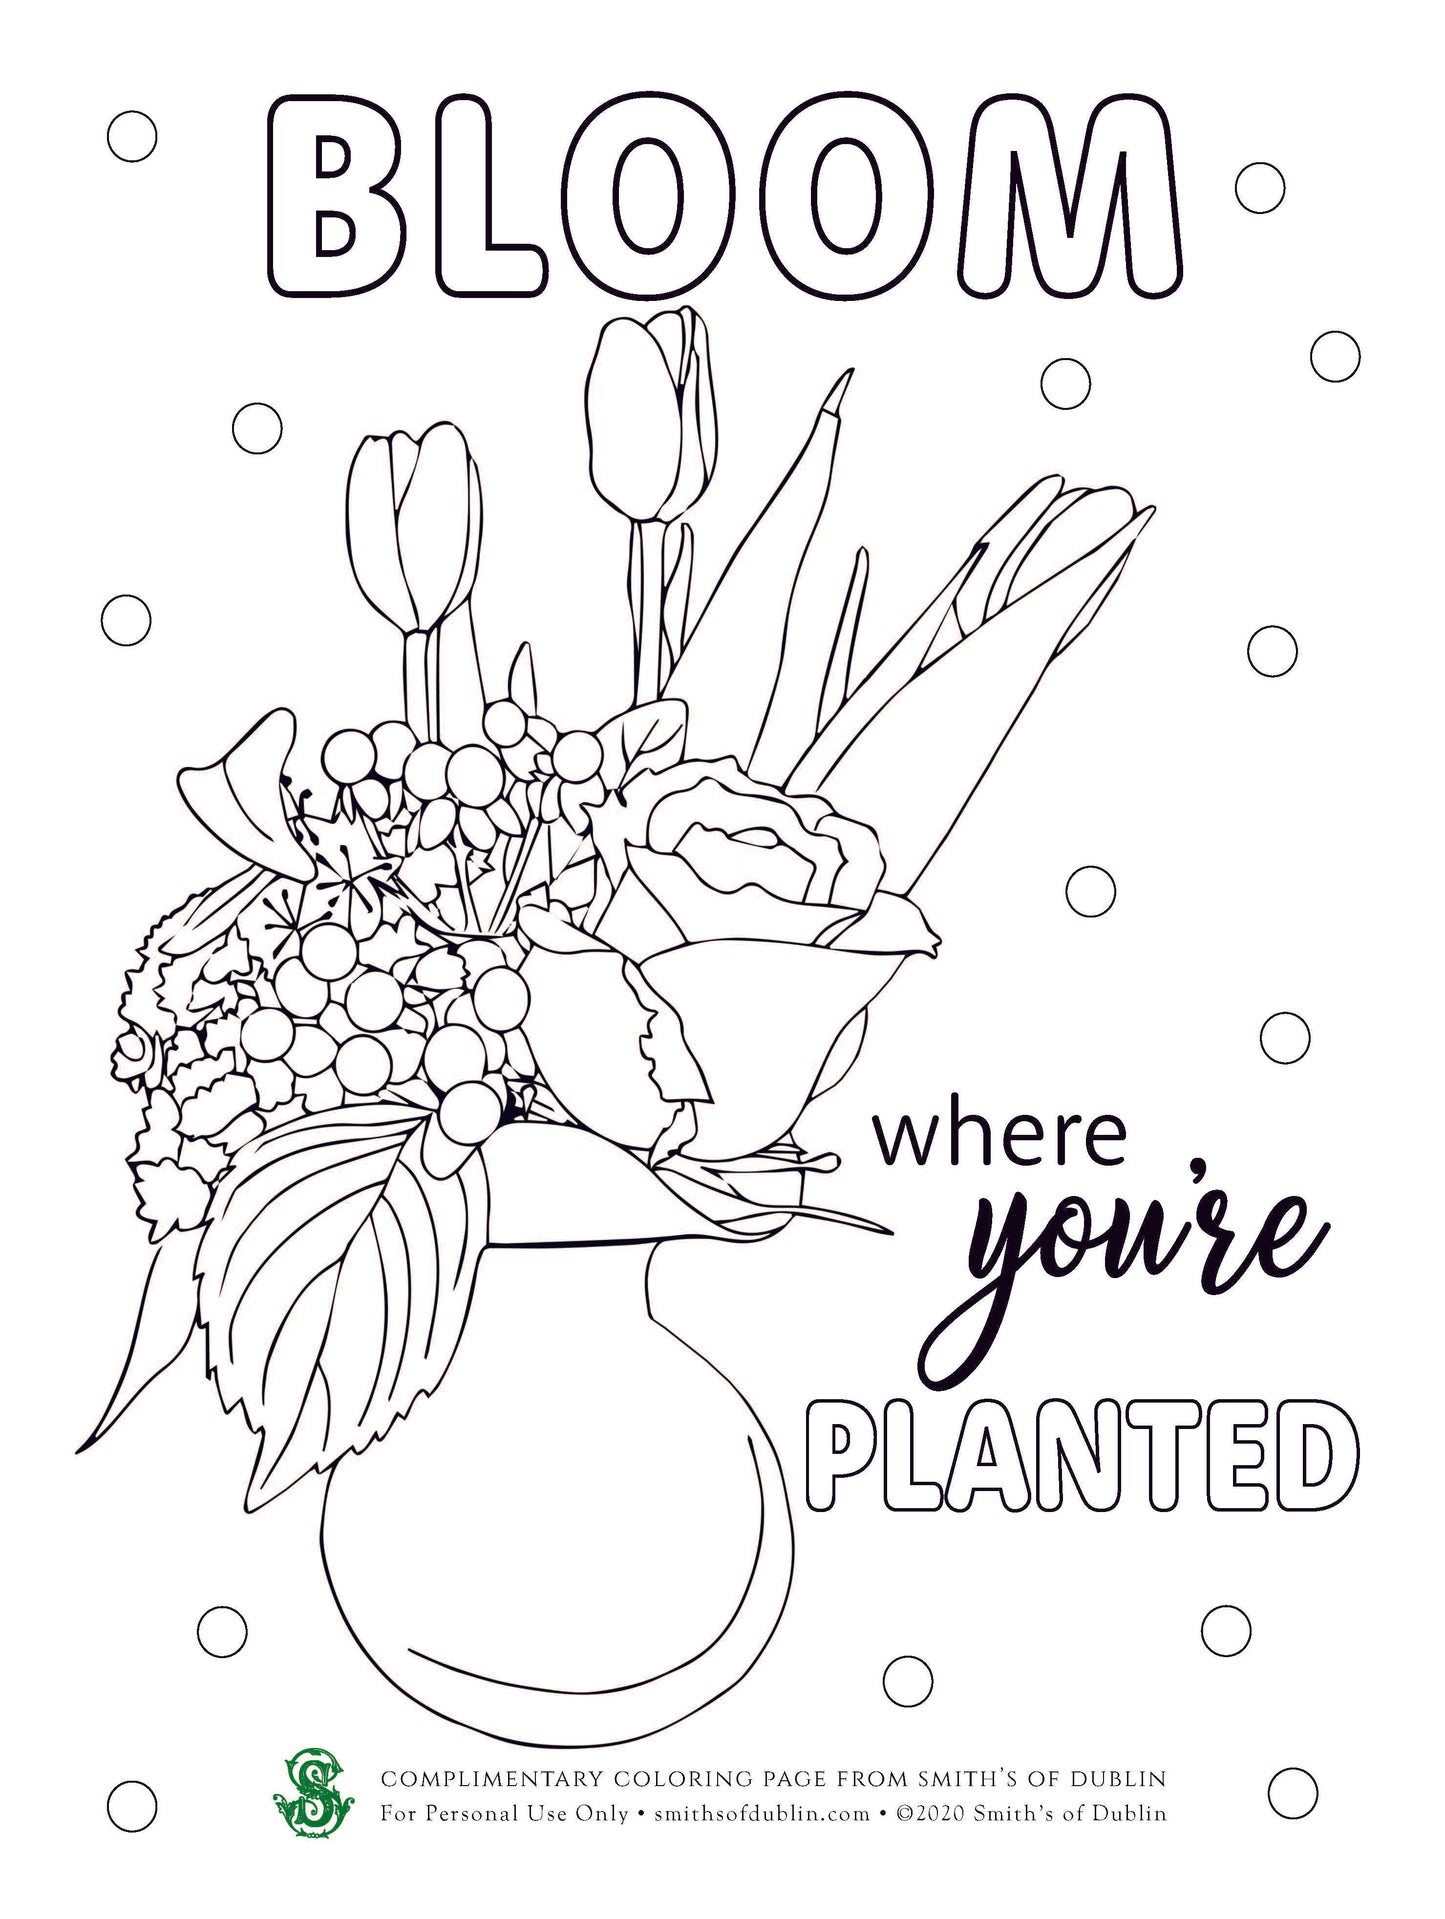 Coloring Sheet, Bloom Where You're Planted